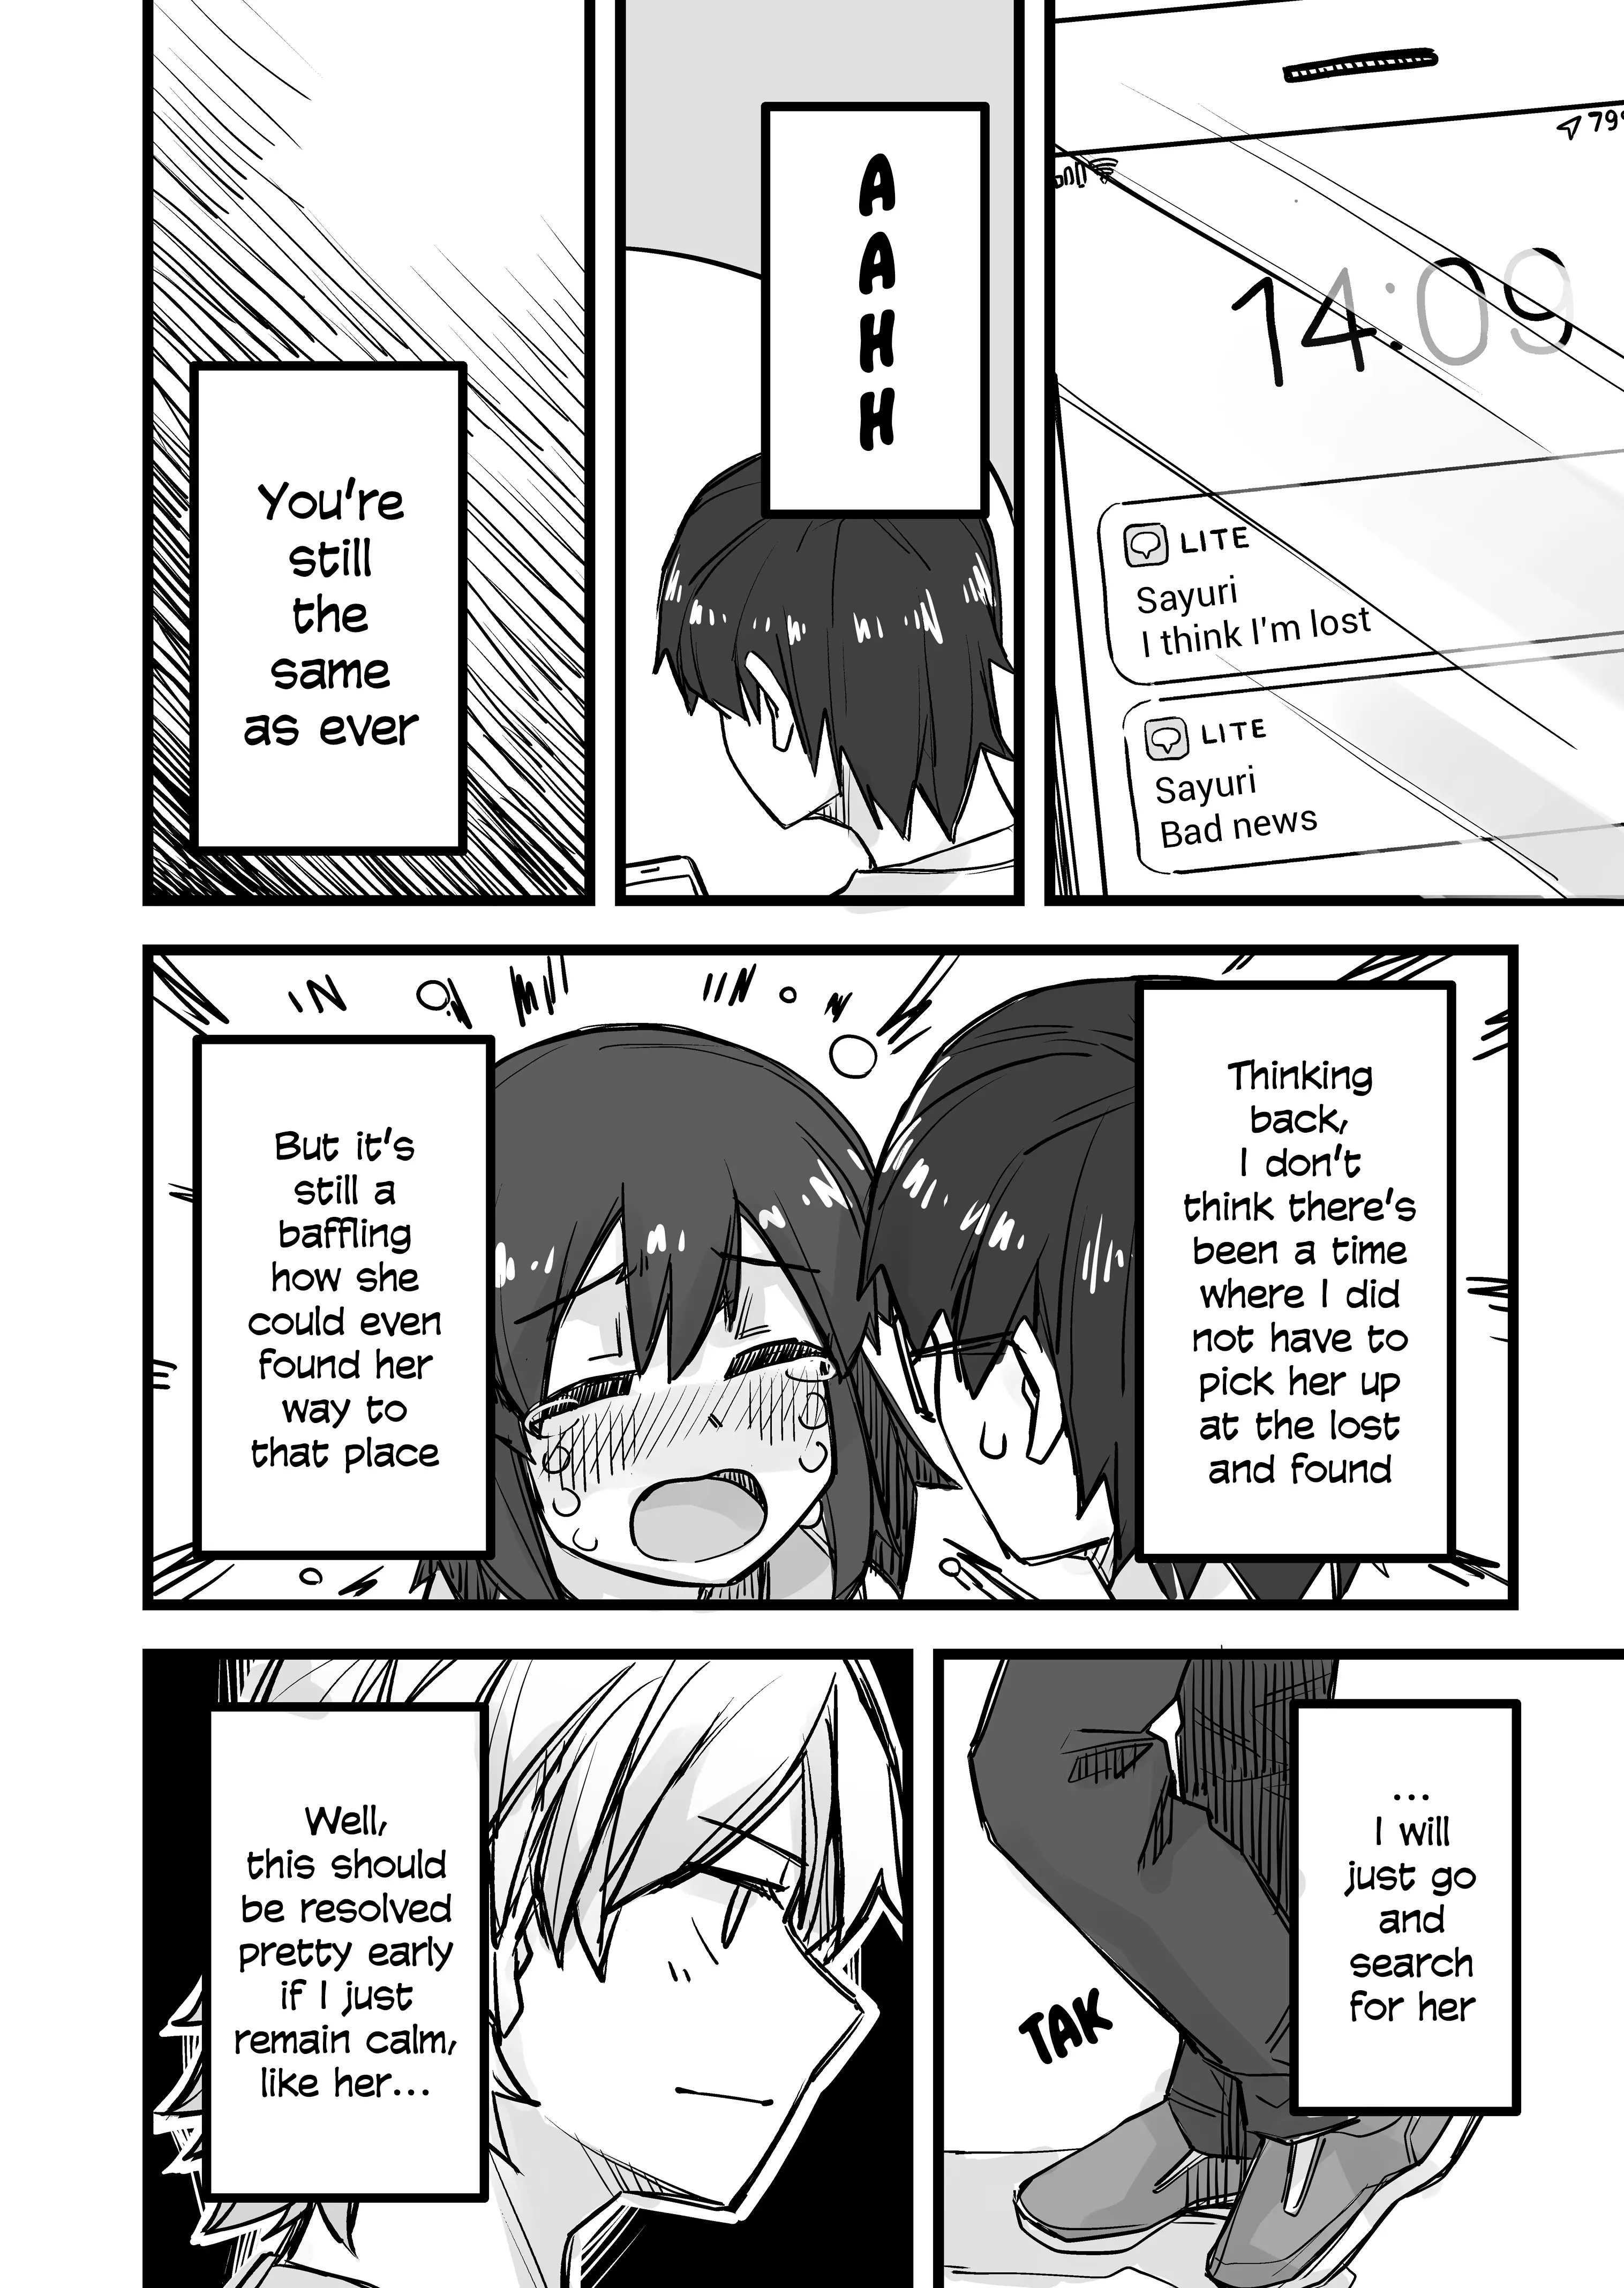 While Cross-Dressing, I Was Hit On By A Handsome Guy! - 22 page 2-e2a64c1a